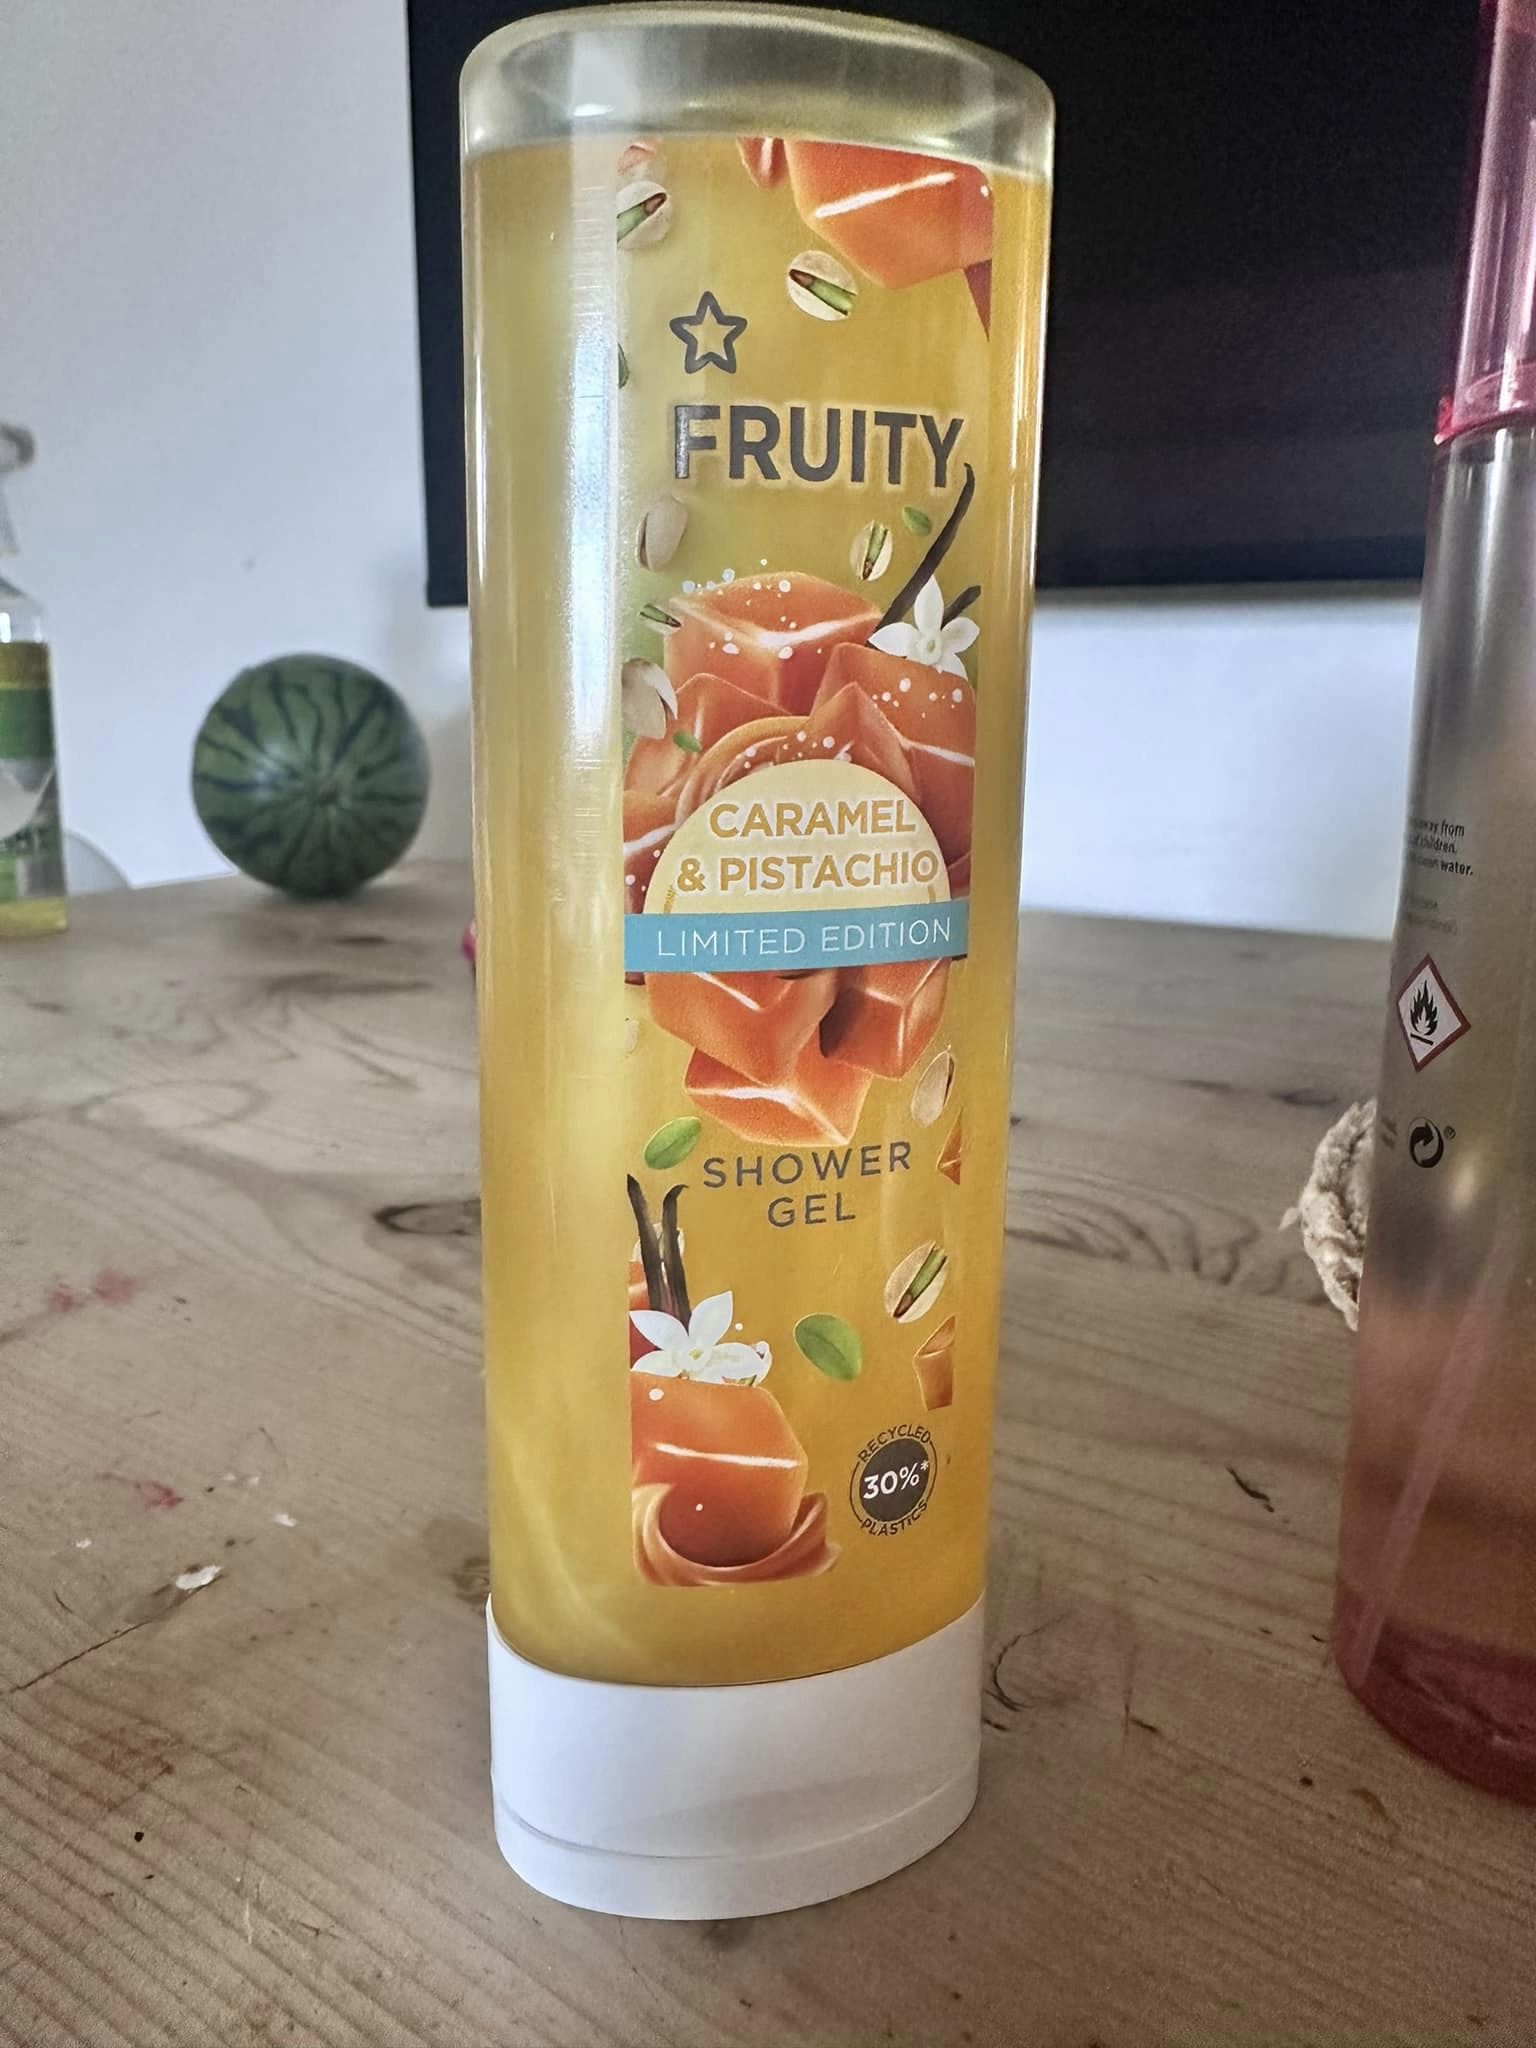 The Superdrug Fruity shower gel costs £1.89 but there is a buy one get one free offer